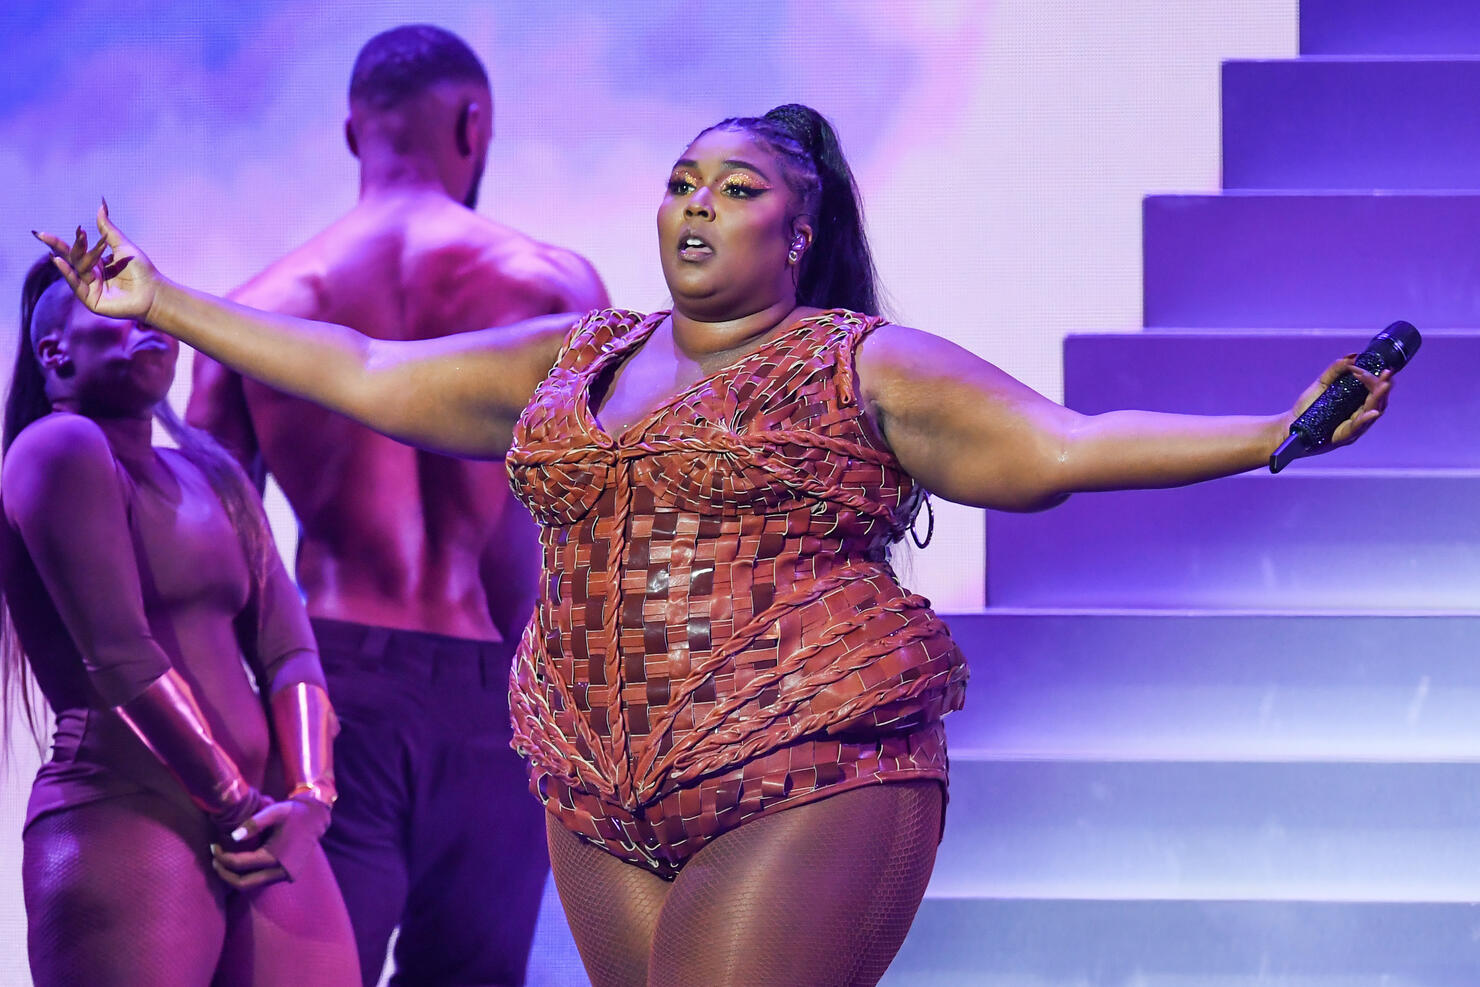 Lizzo Poses In Nude Body Suit: 'I Look Like A Barbie